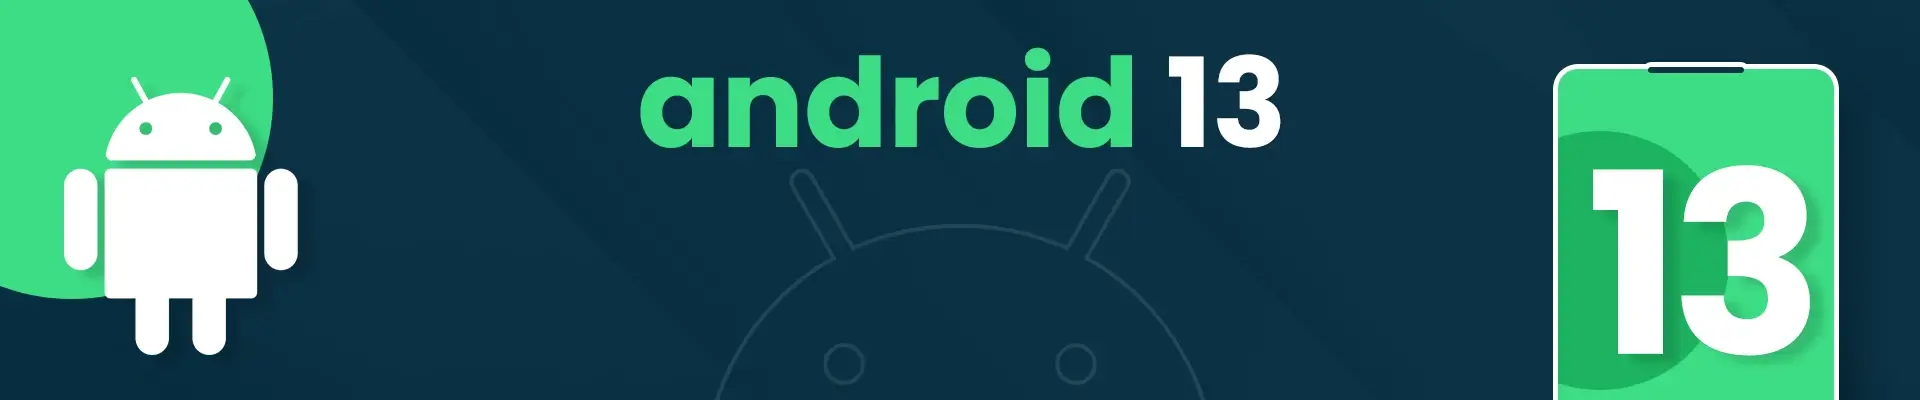 All The Latest Information Of Android 13 Update Available So Far!